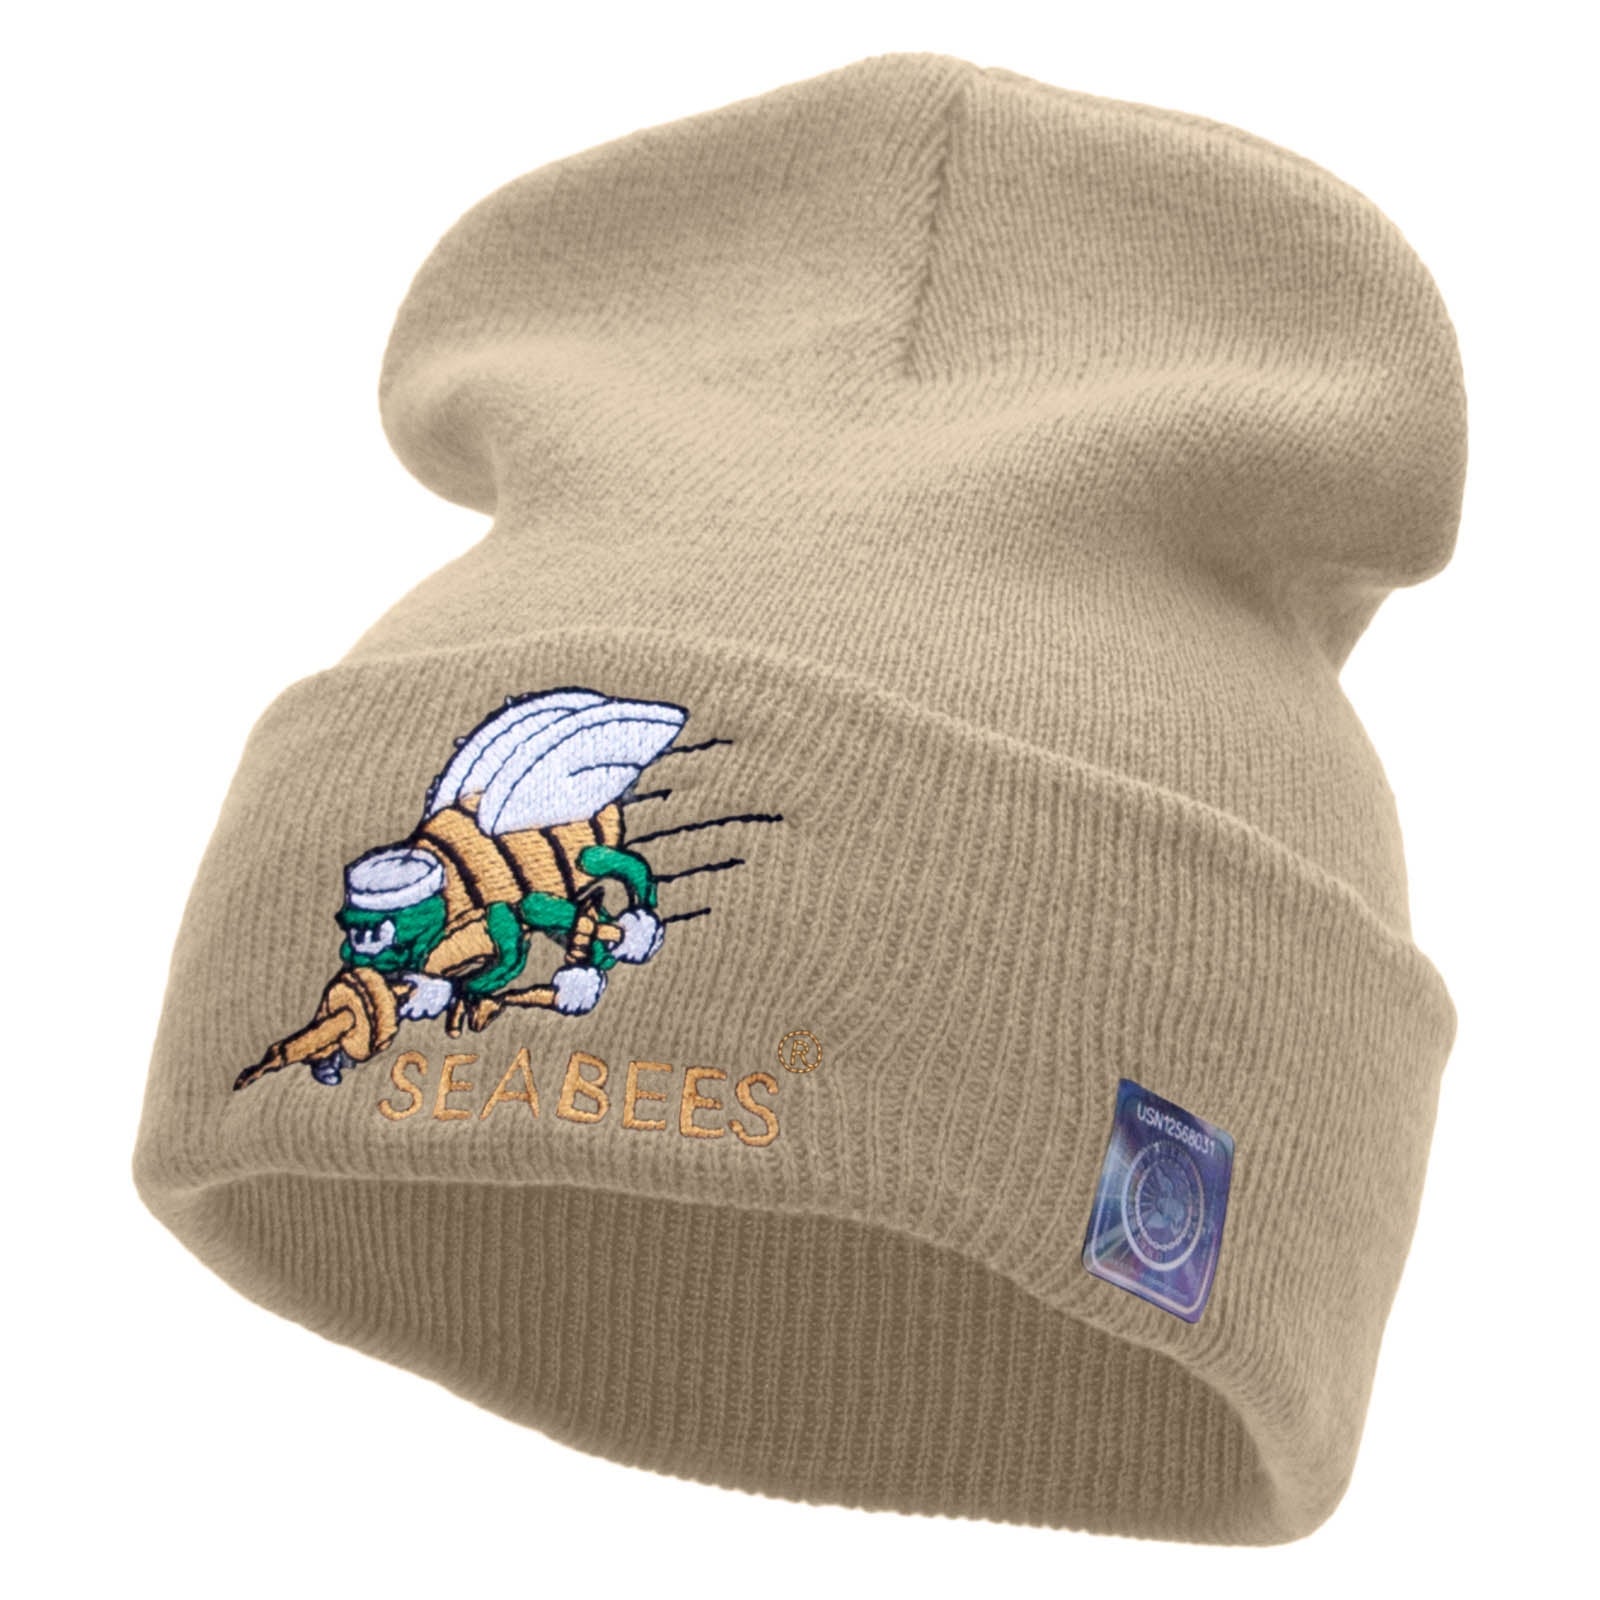 Licensed Navy Seabees Symbol Embroidered Cuff Long Beanie Made in USA - Khaki OSFM